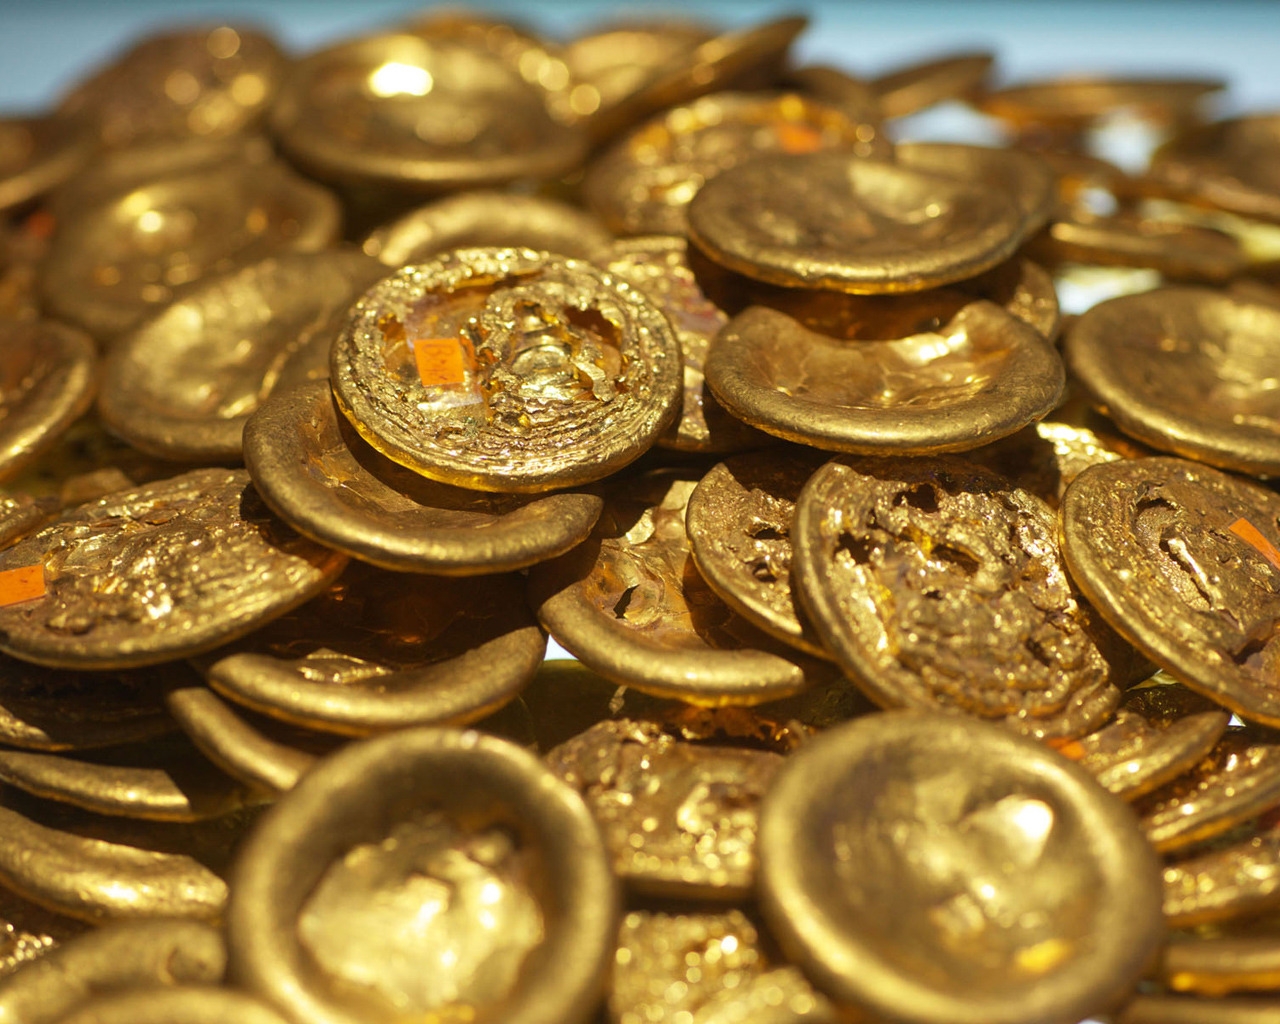 Old Chinese Gold Coins for 1280 x 1024 resolution